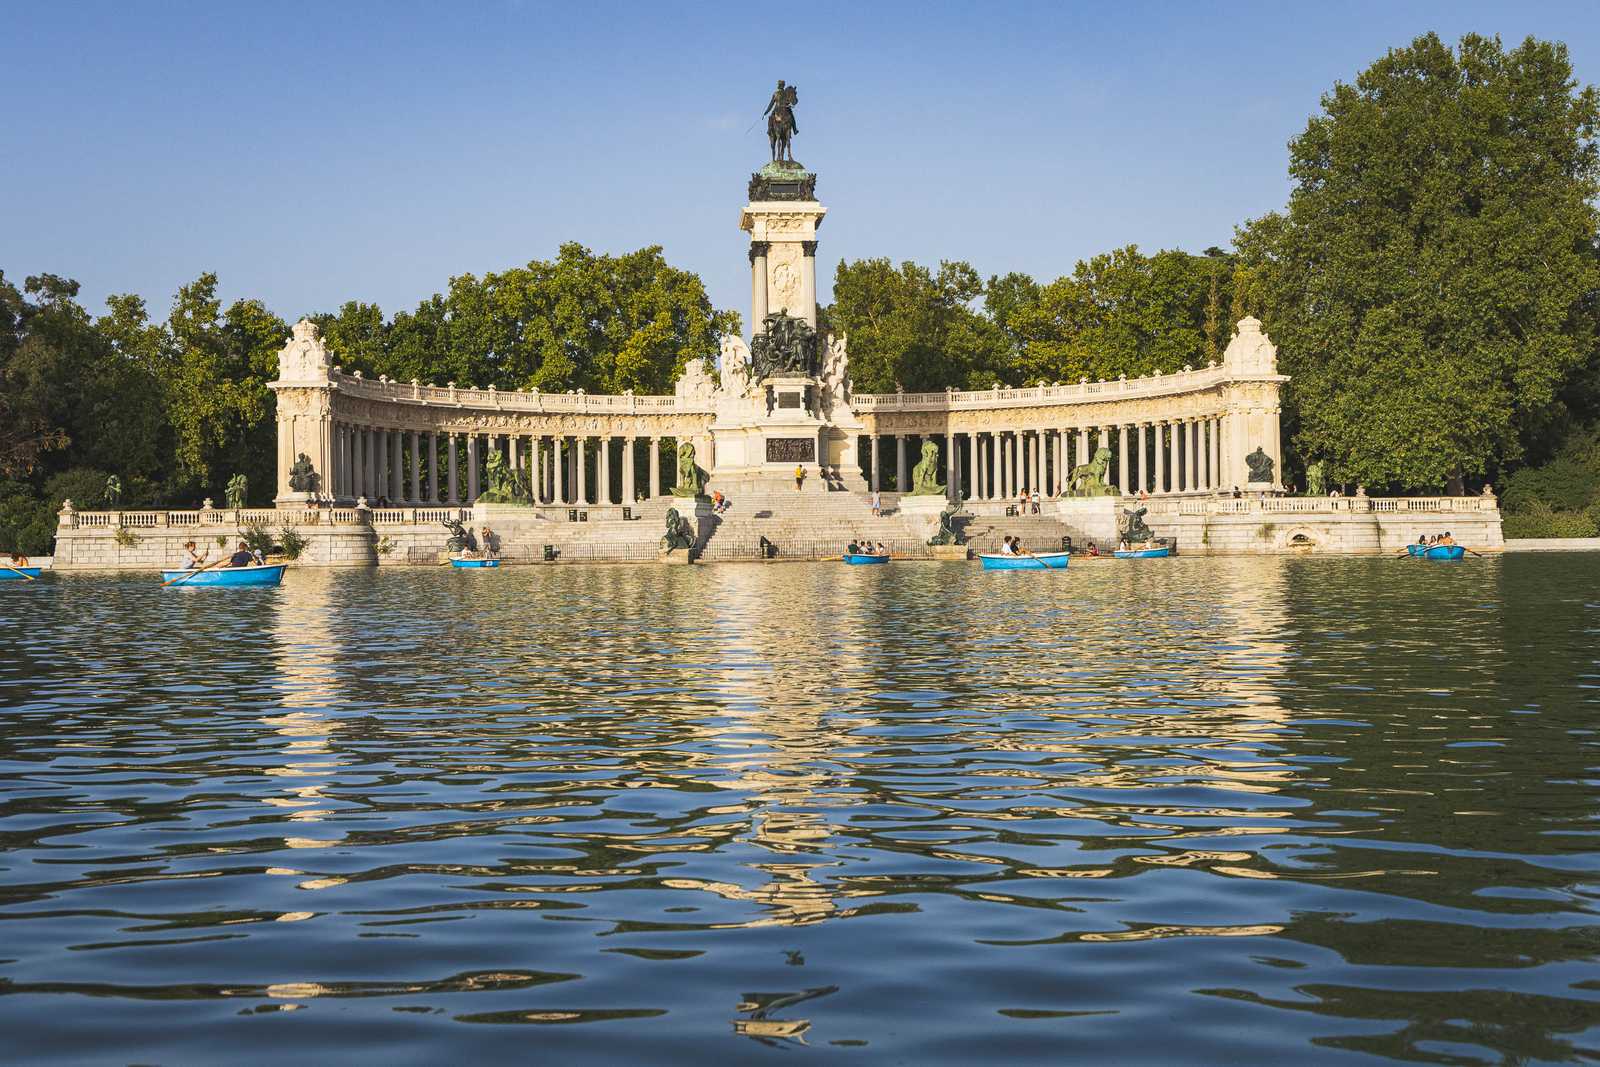 The lake and Alfonso XII monument in Parque del Retiro